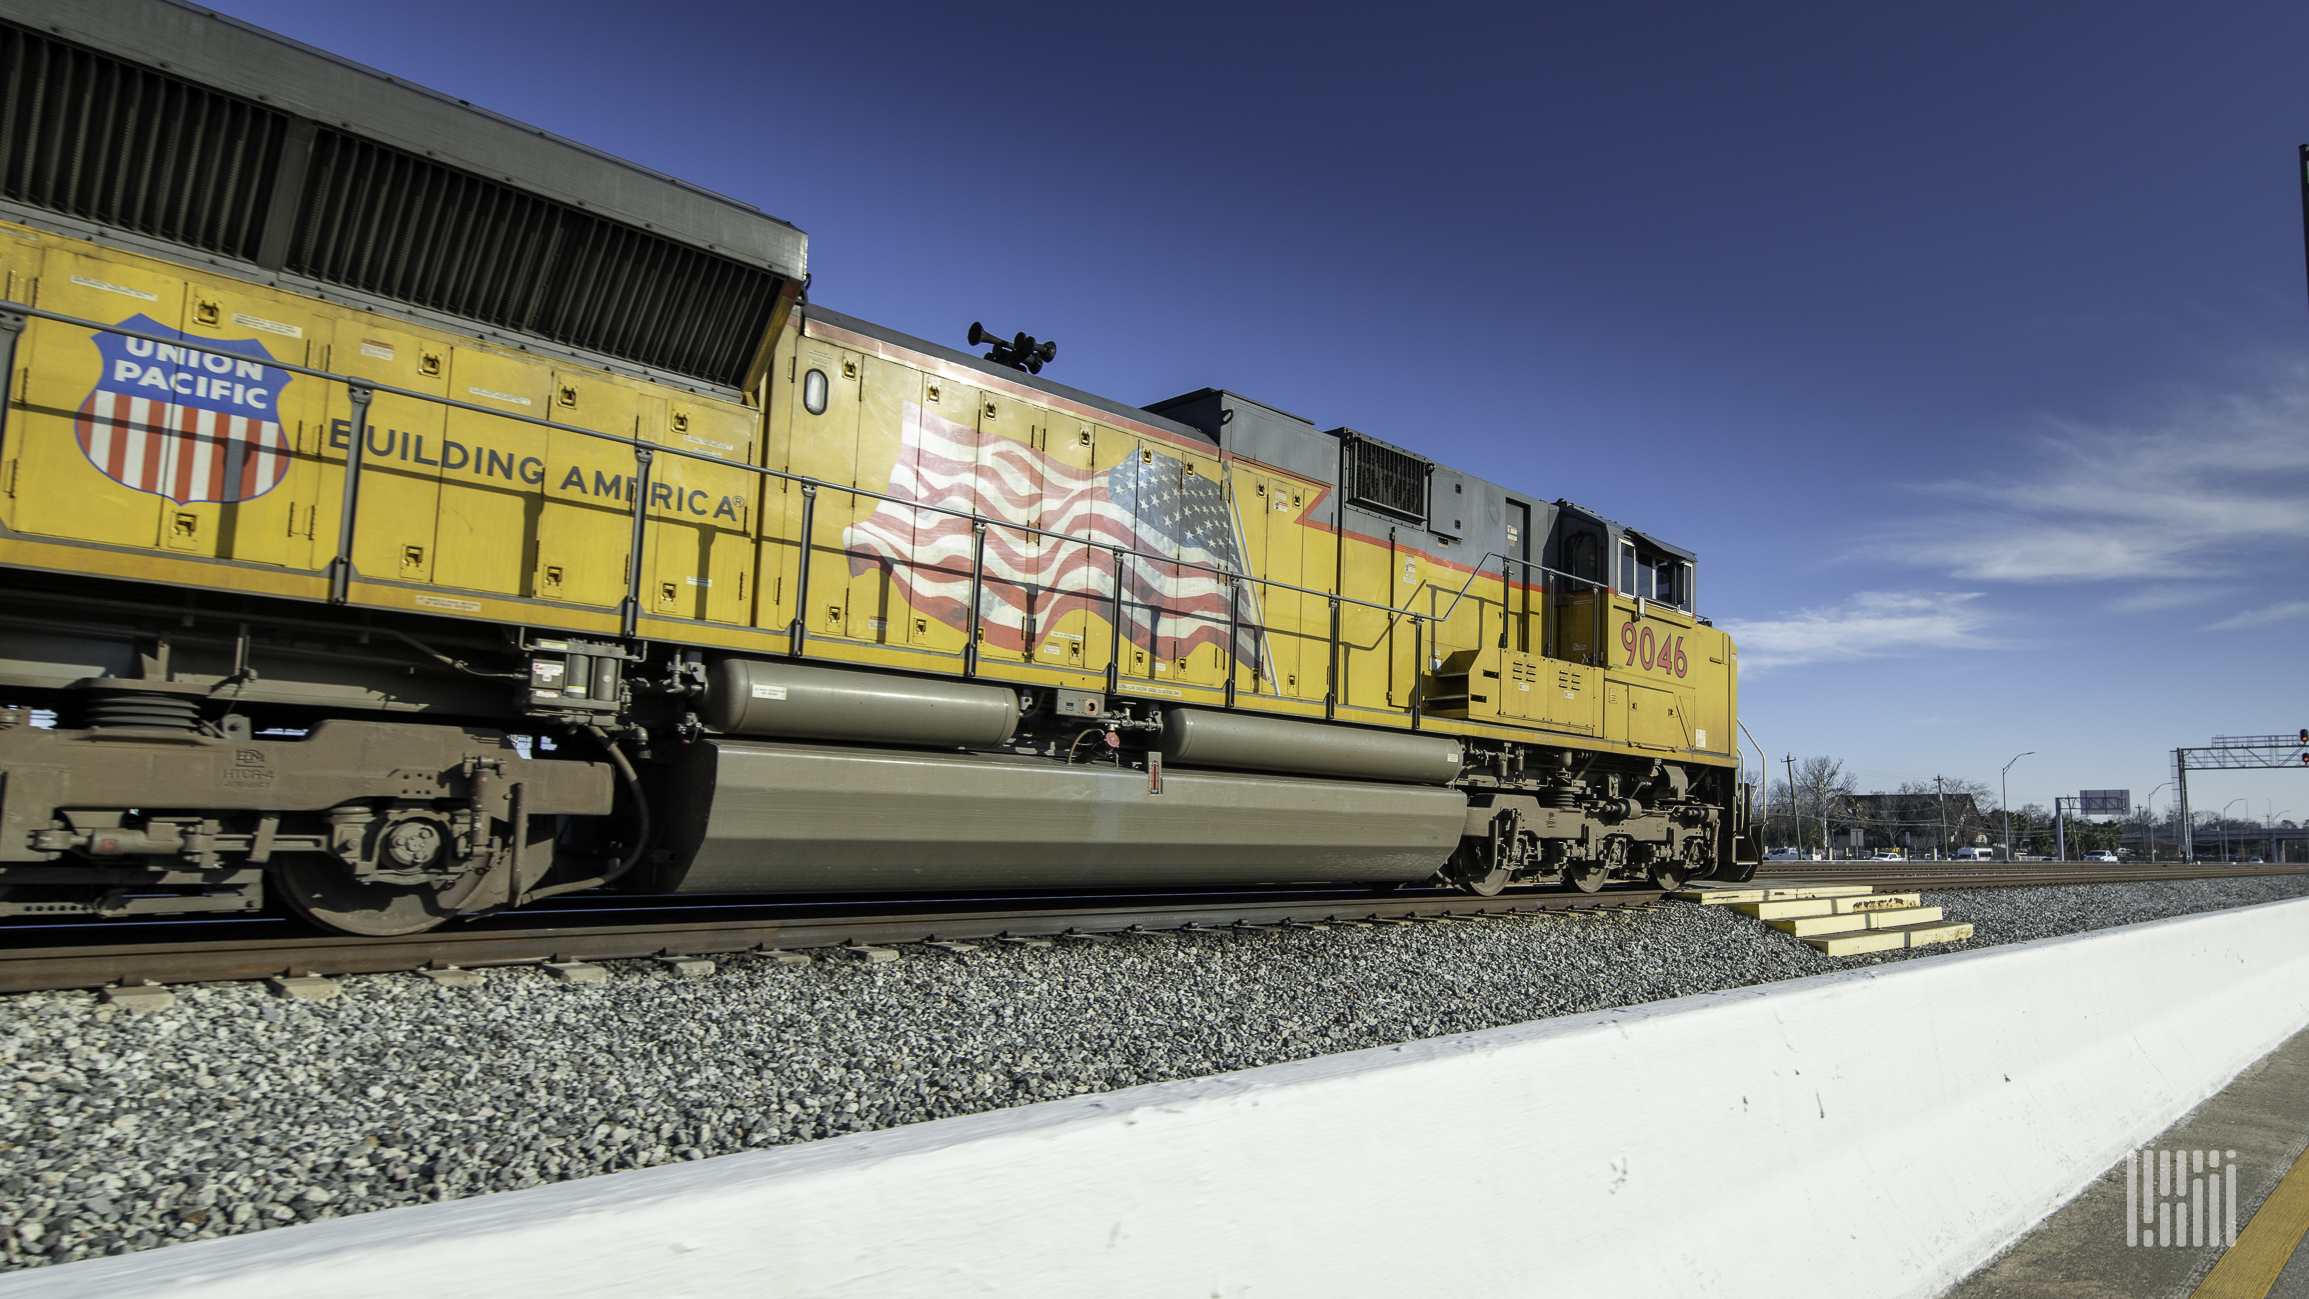 A photograph of a Union Pacific train rolling down a rail yard.